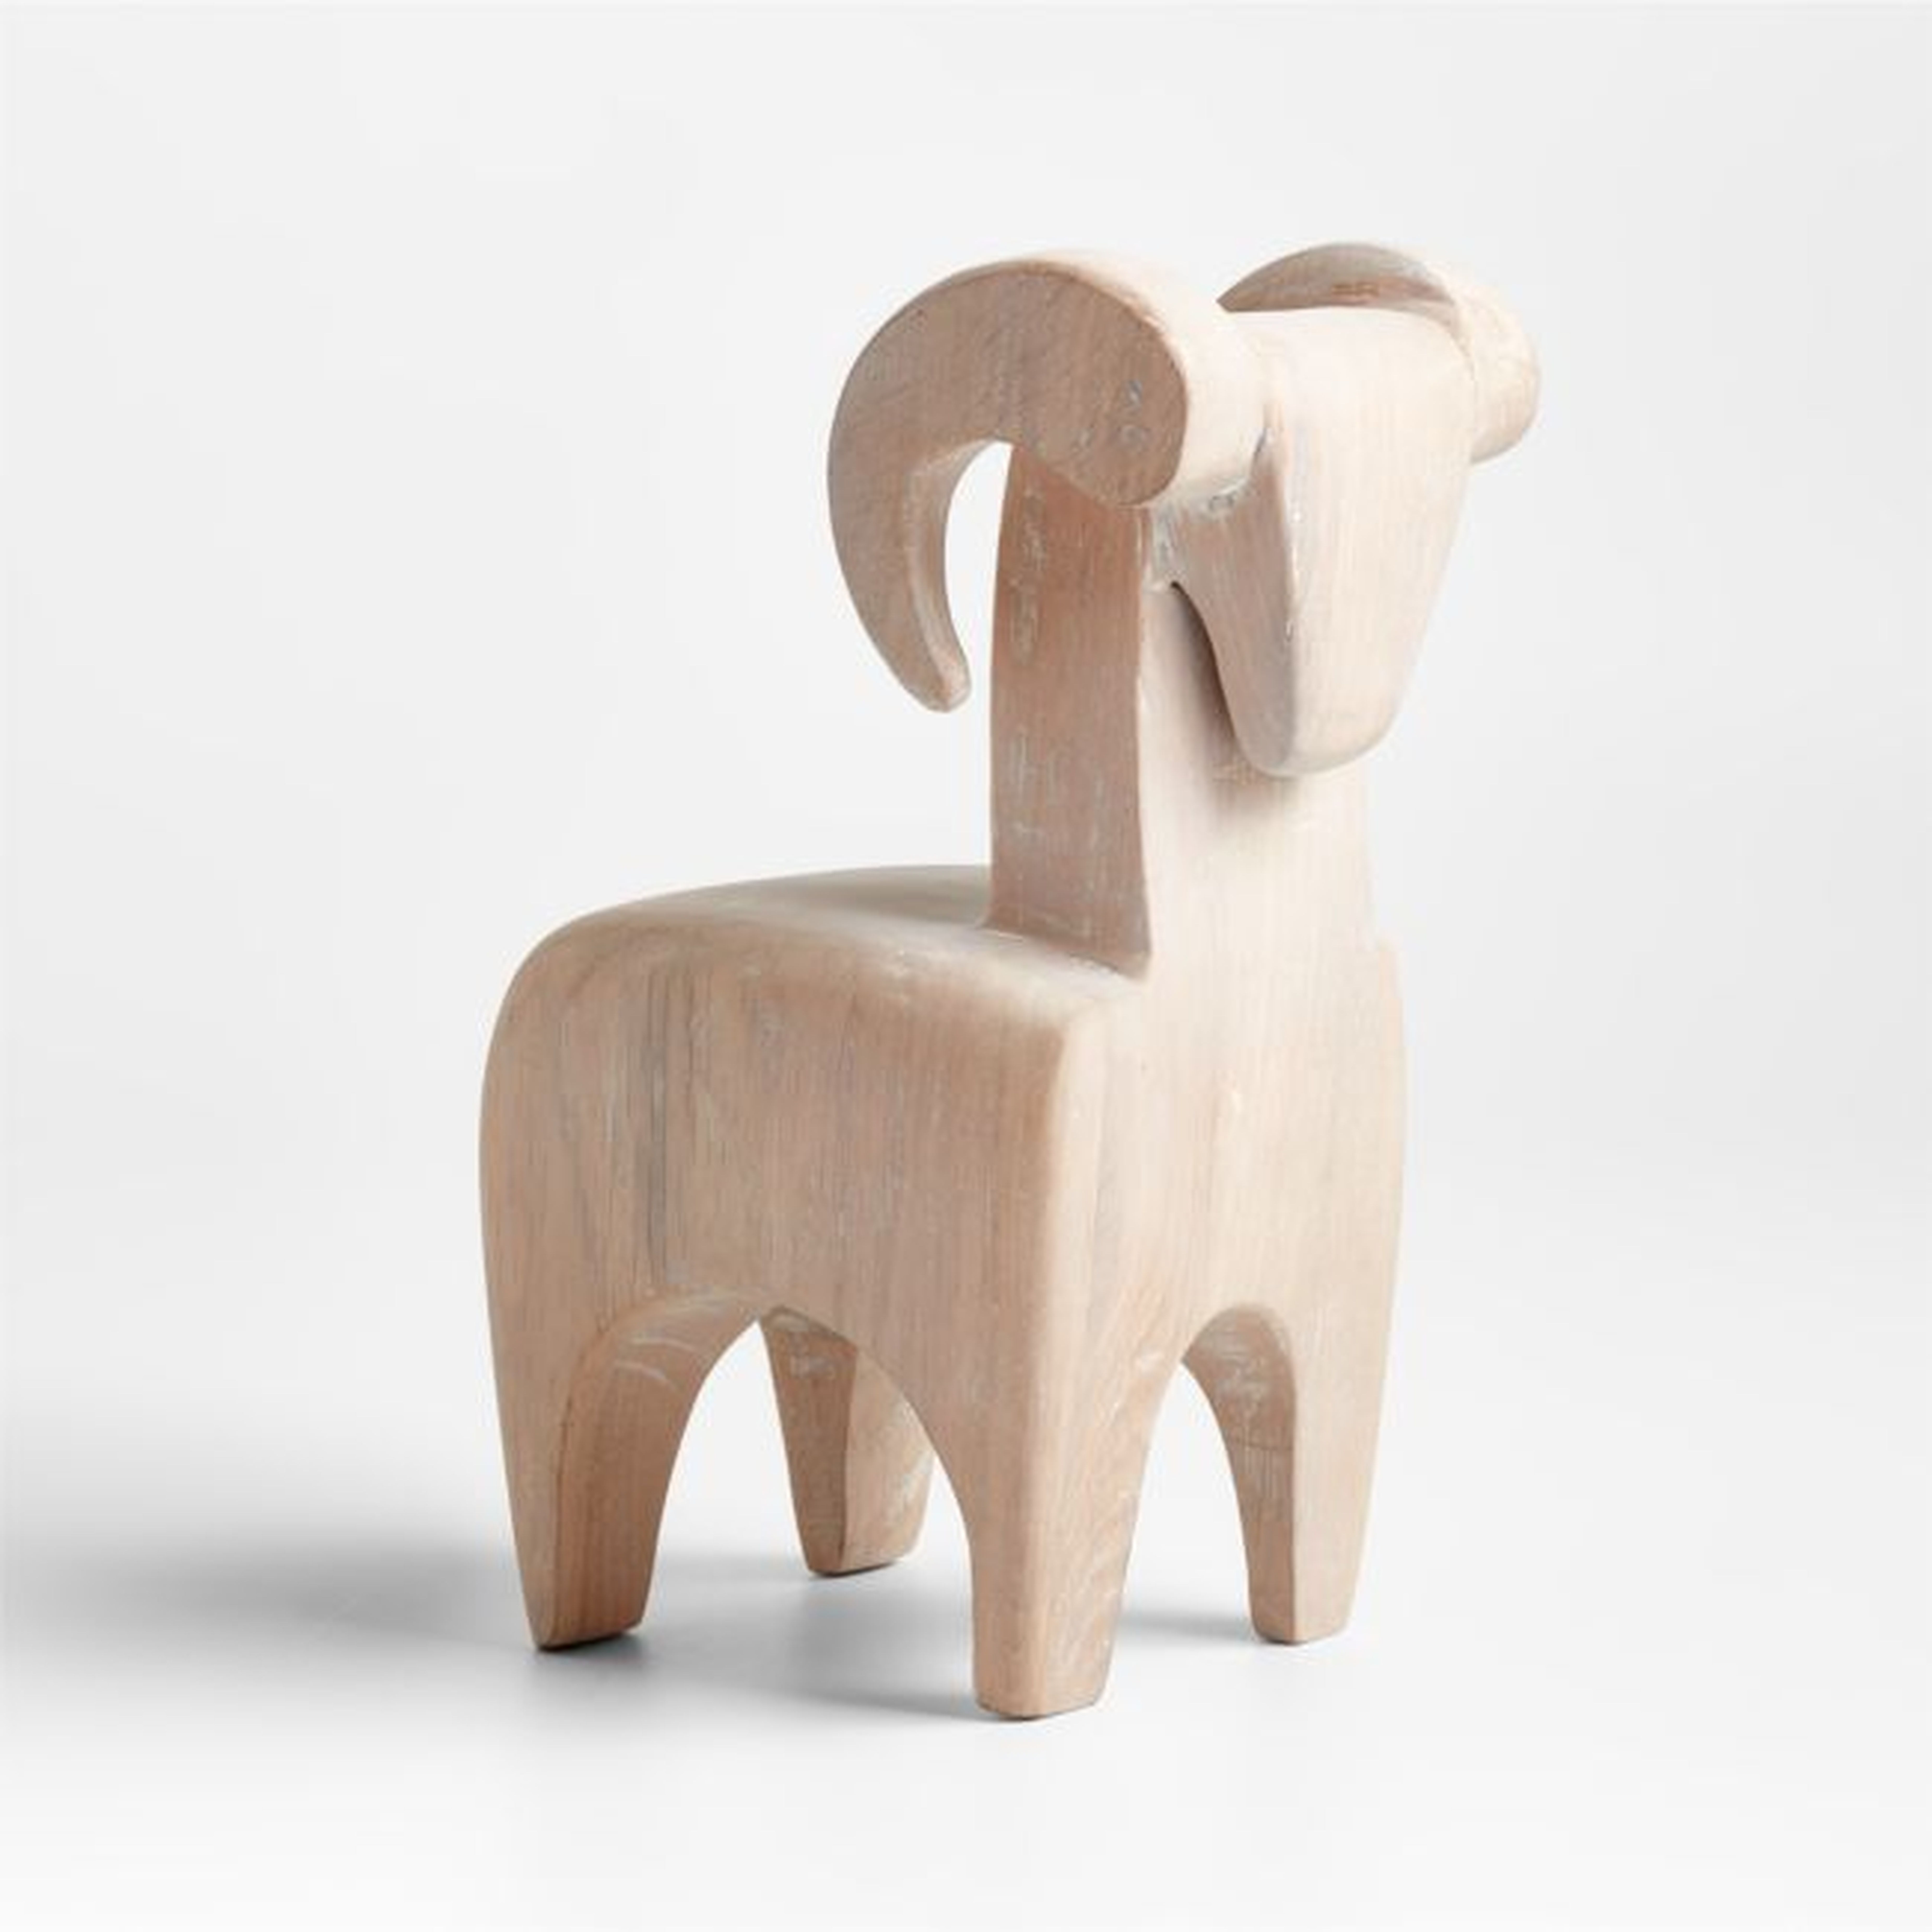 White Wood Ram Sculpture 9.5" - Crate and Barrel